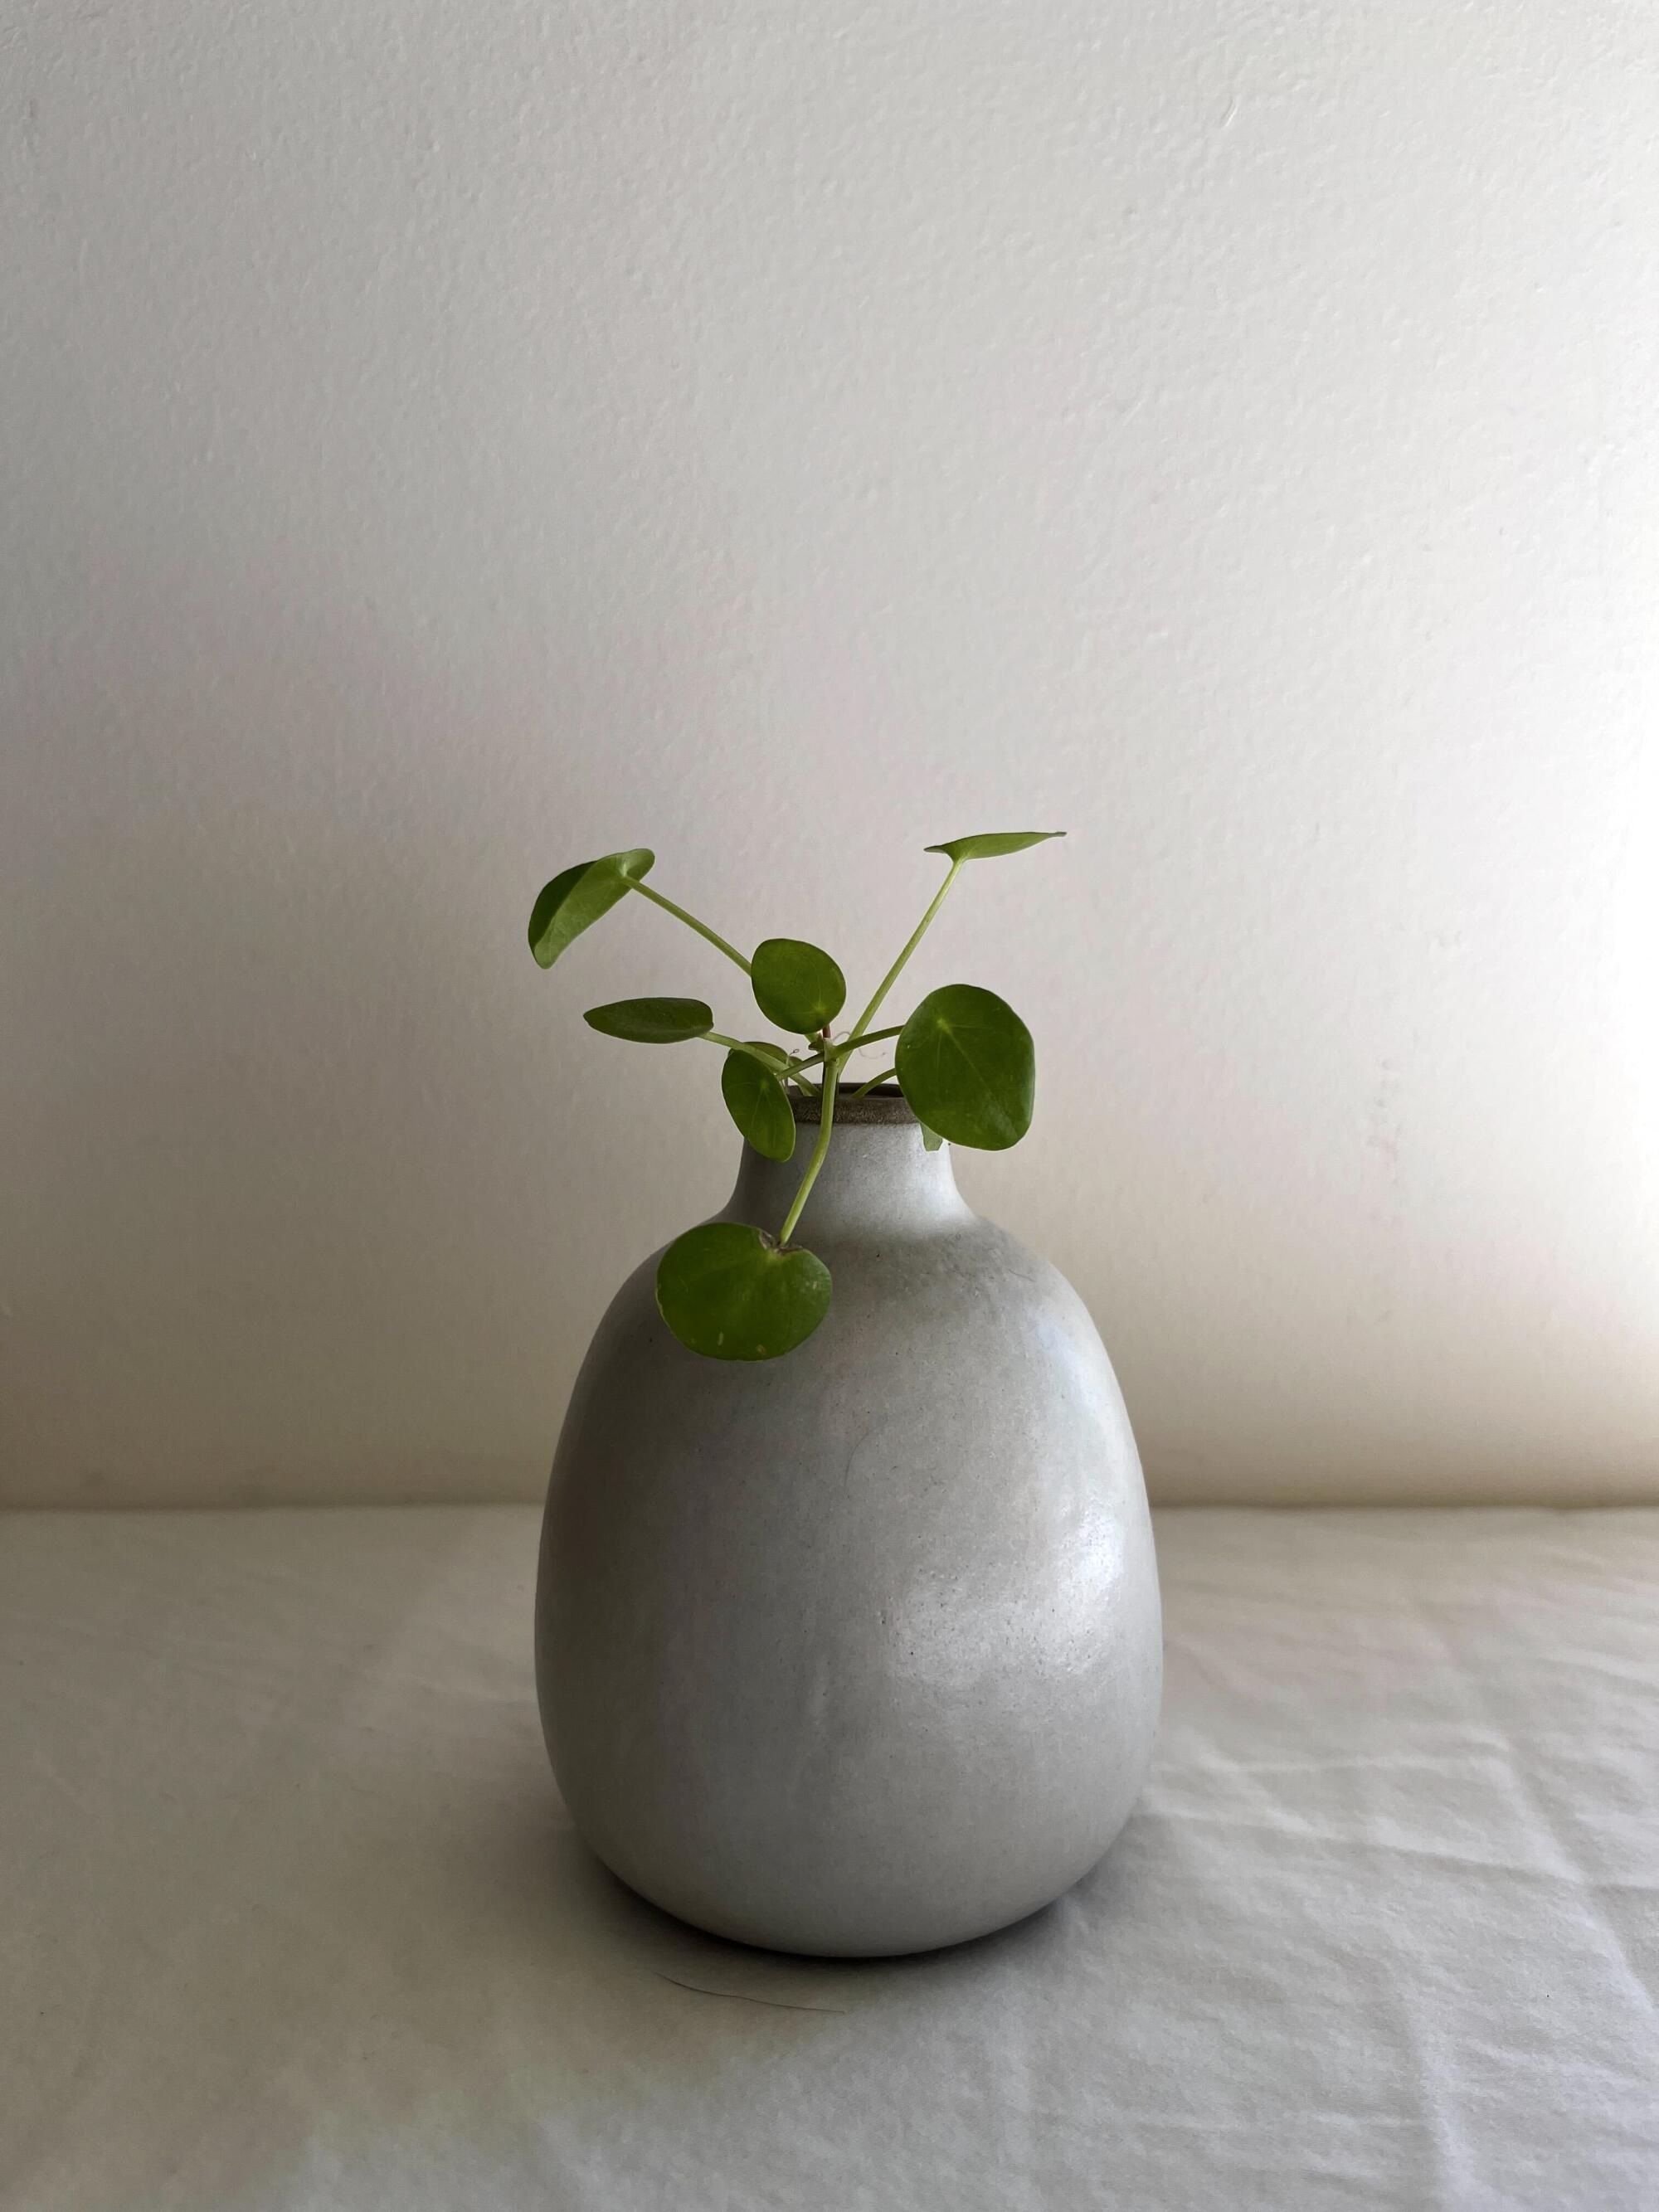 Plant cutting in a vase